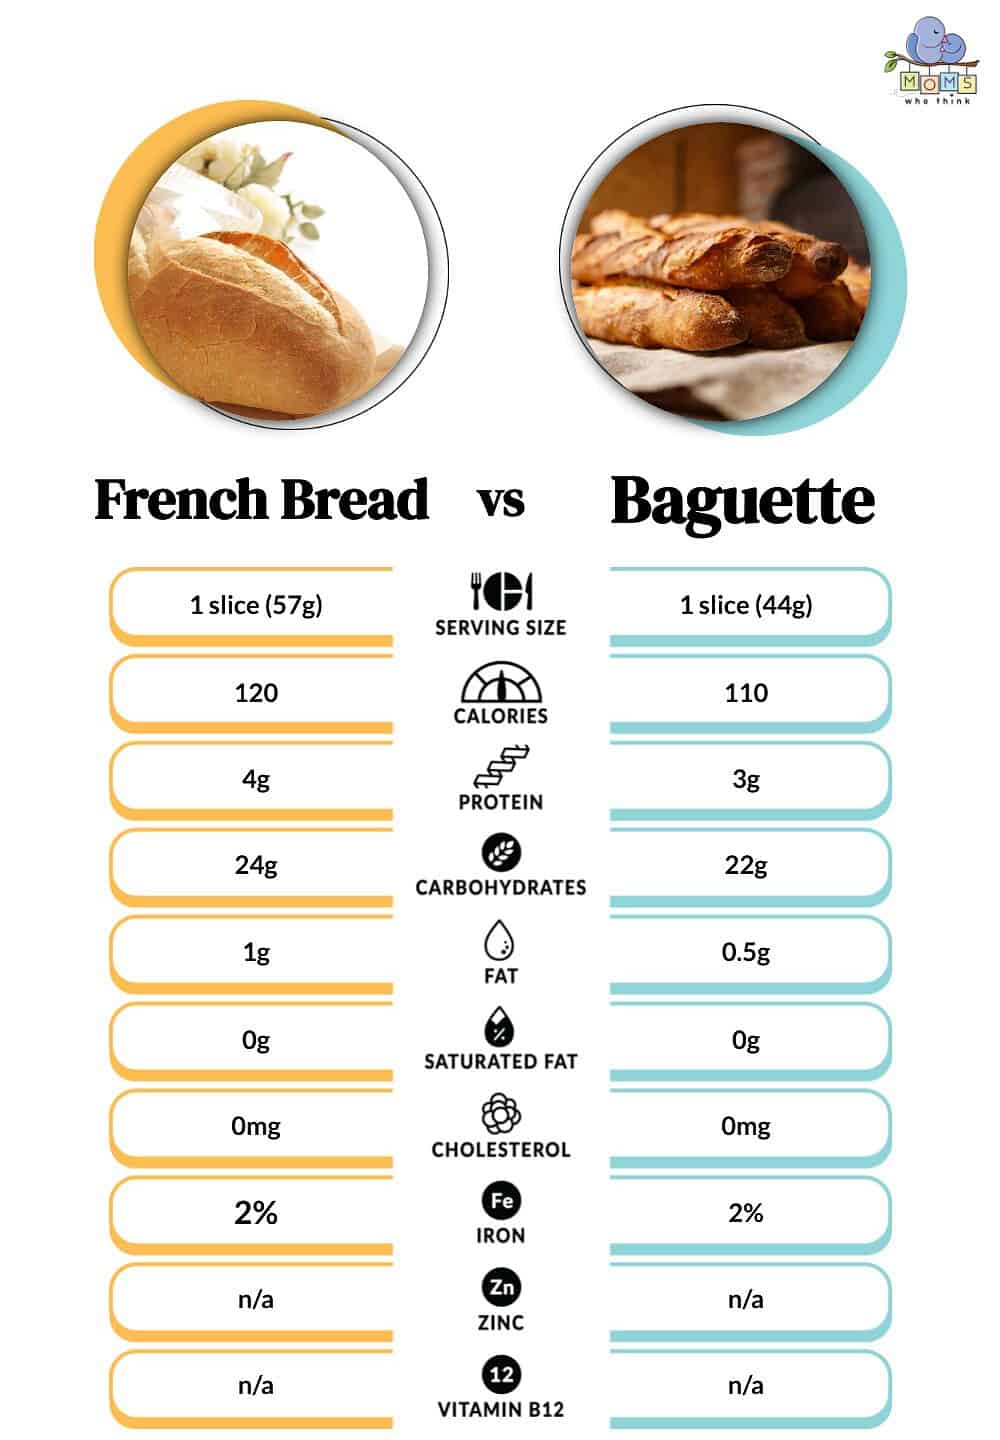 French Bread vs Baguette Nutritional Facts